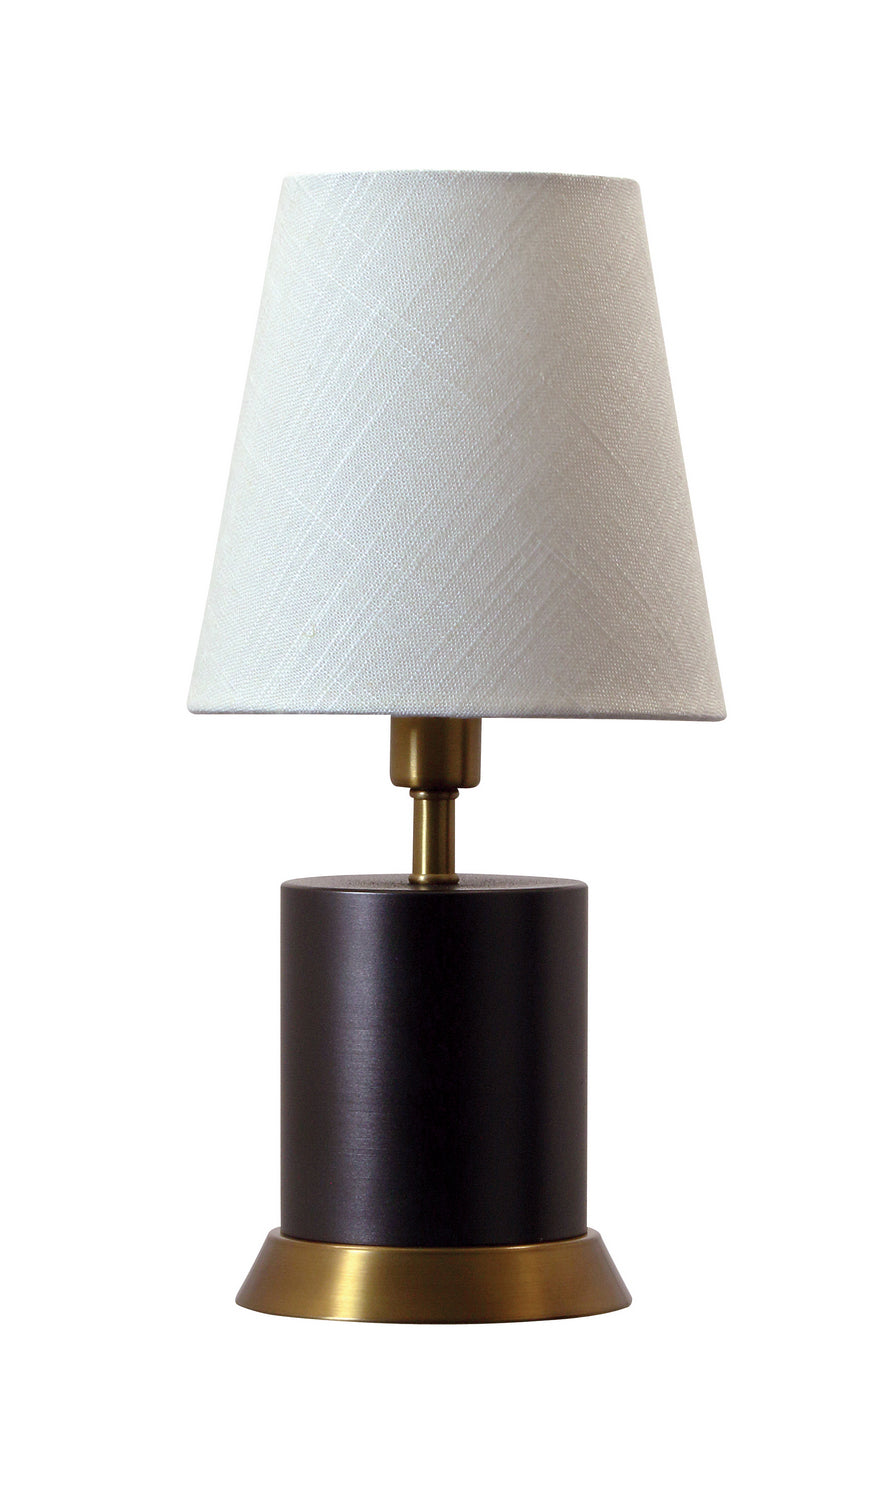 House of Troy - GEO311 - One Light Table Lamp - Geo - Mahogany Bronze With Weathered Brass Accents